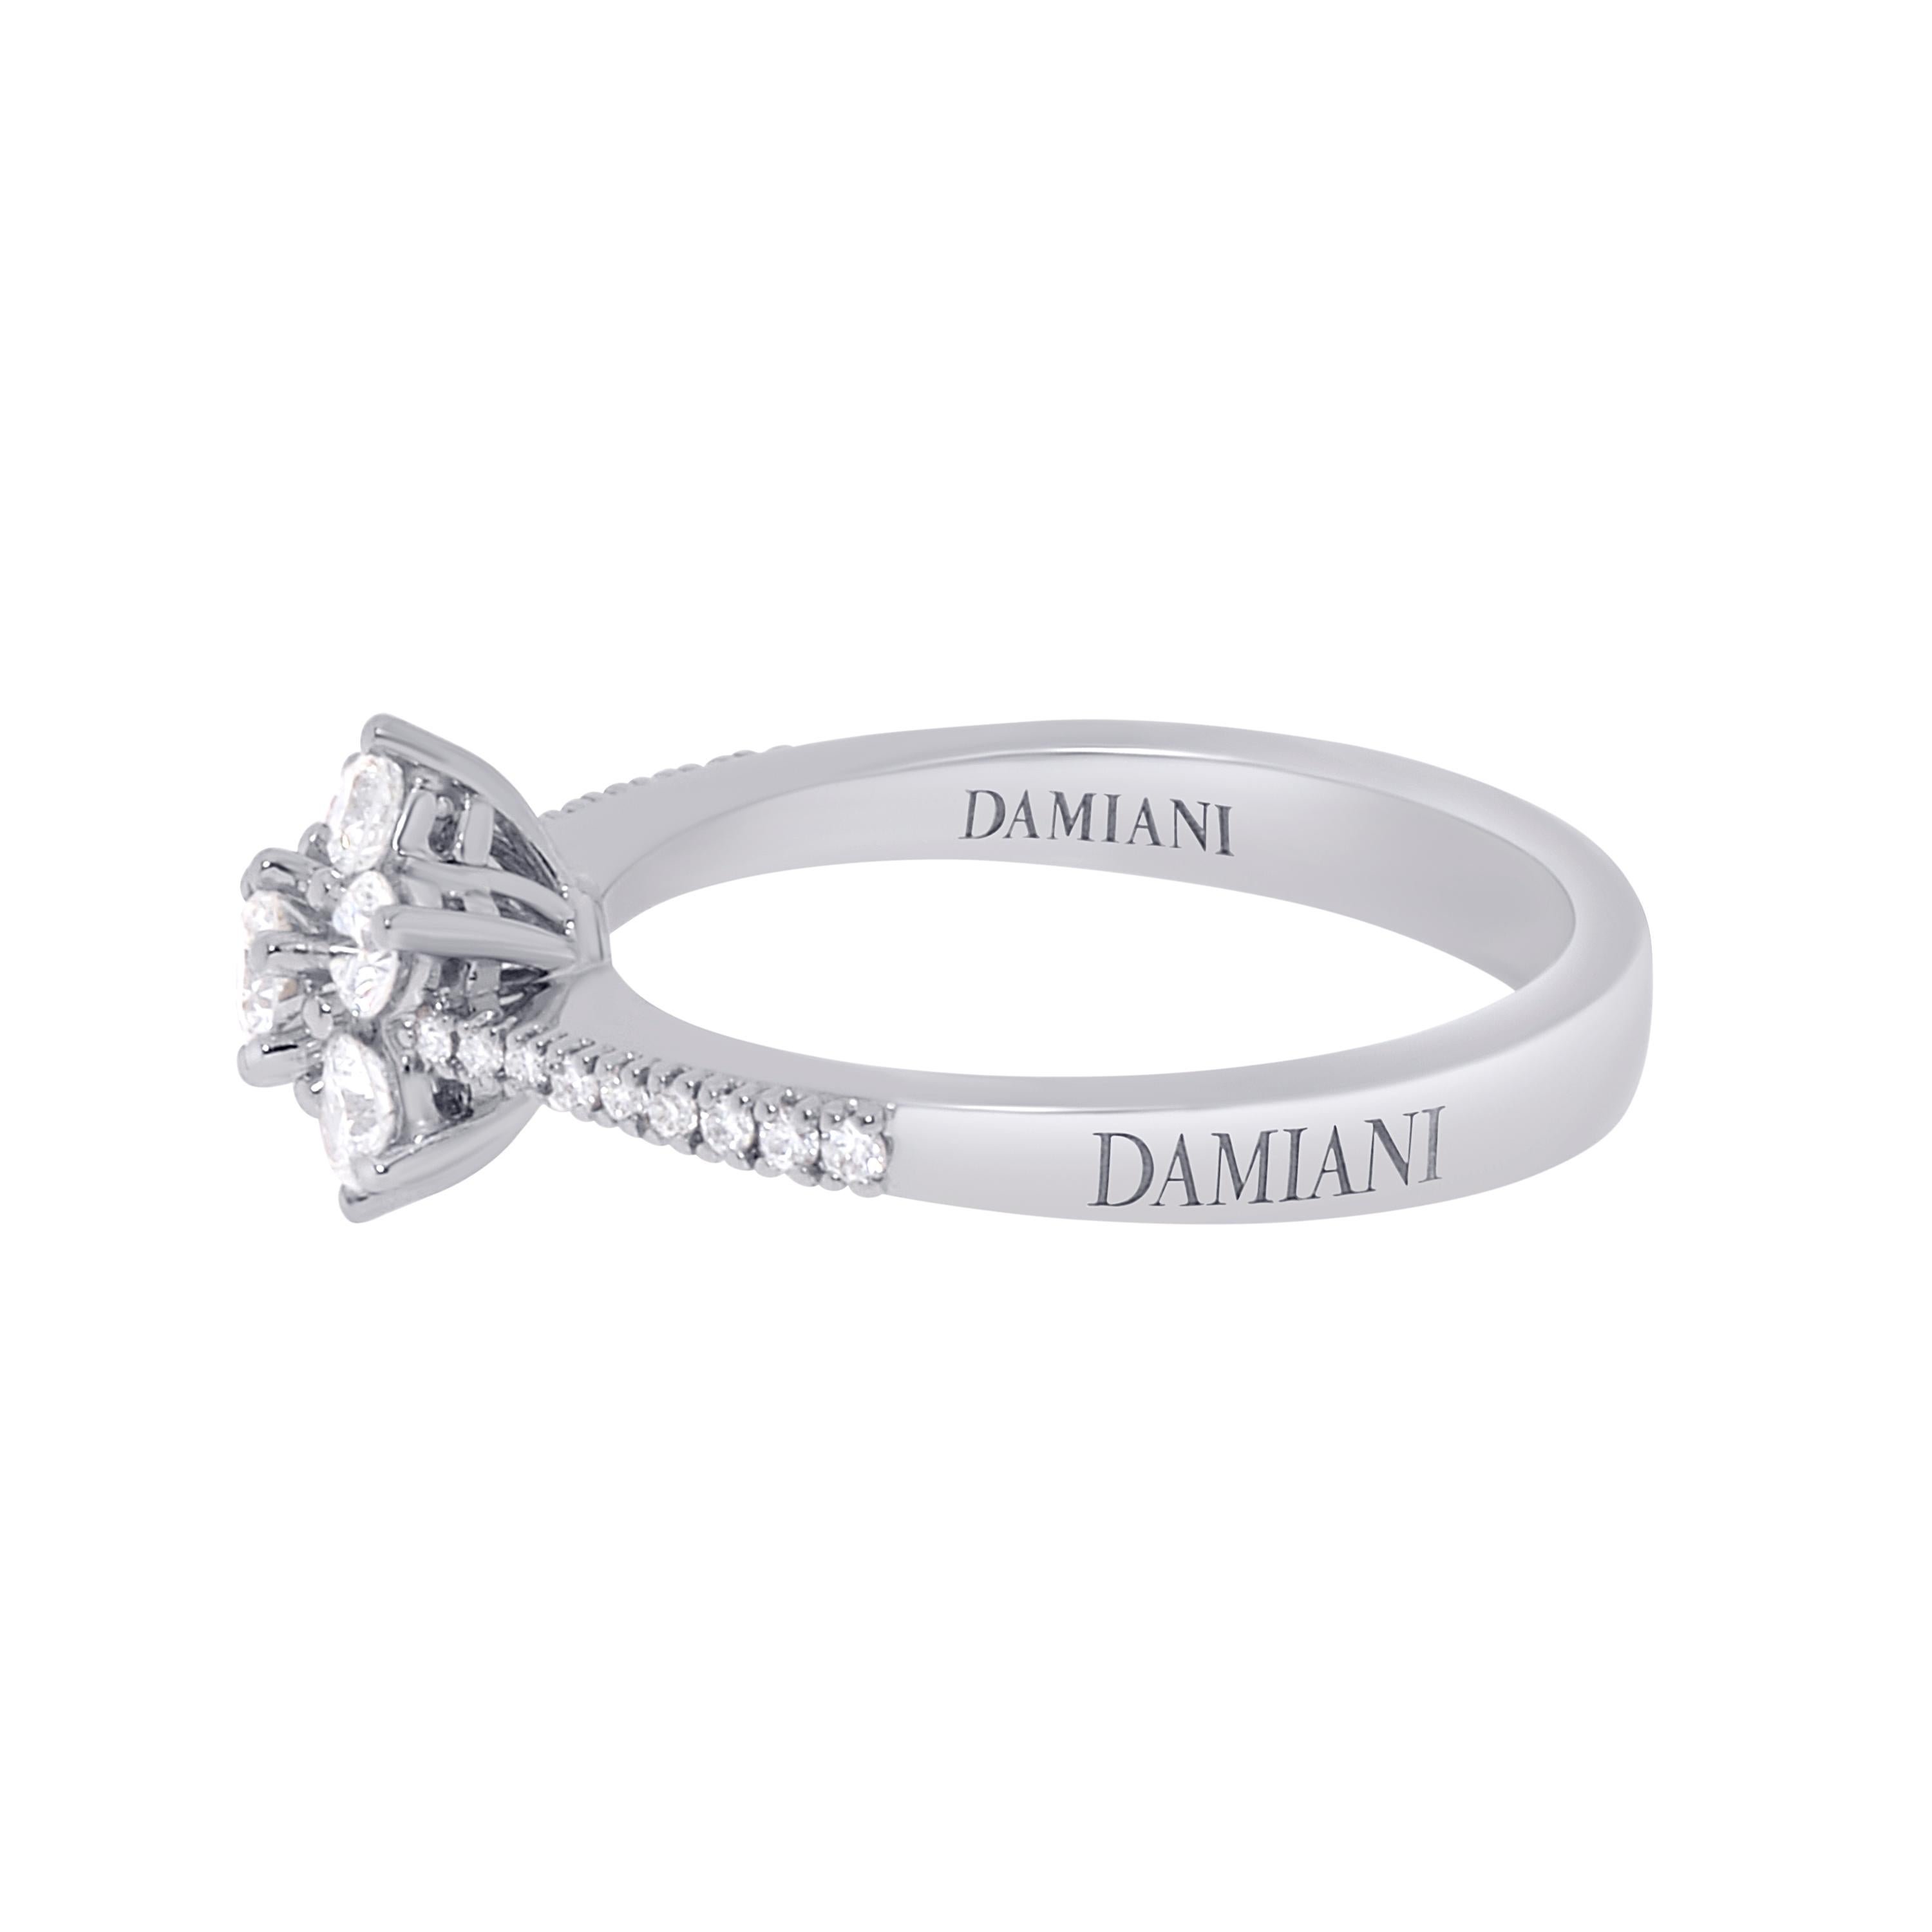 Contemporary Damiani 18K White Gold, Diamond Cluster Ring Sz. 6.25 For Sale